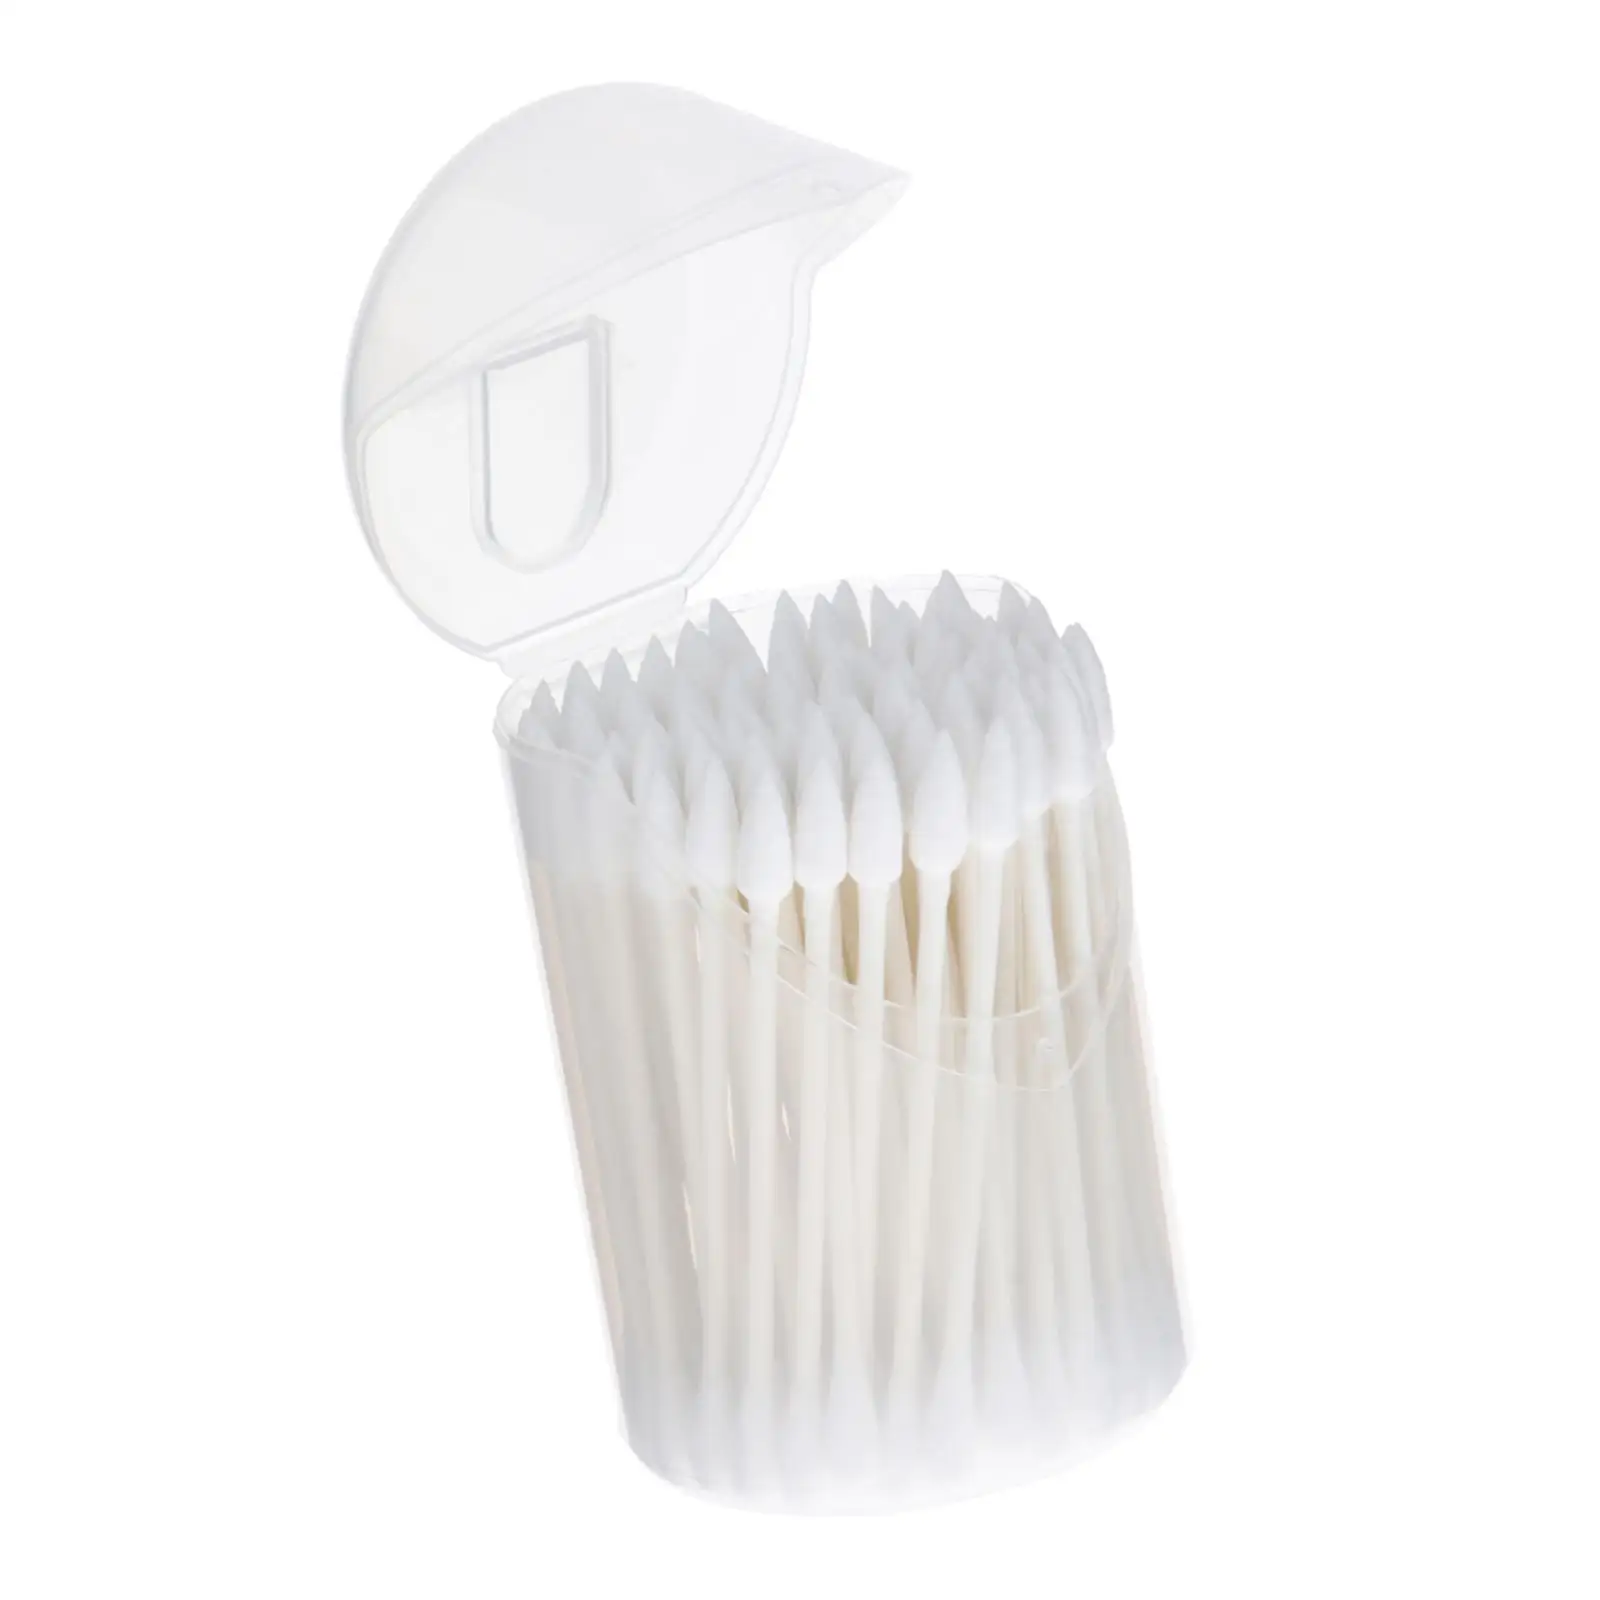 

precision Cotton Swabs Double Head Cotton Swab Model Model Disposable Cotton Swabs Aging Wipe Penetrating Cleaning Tools